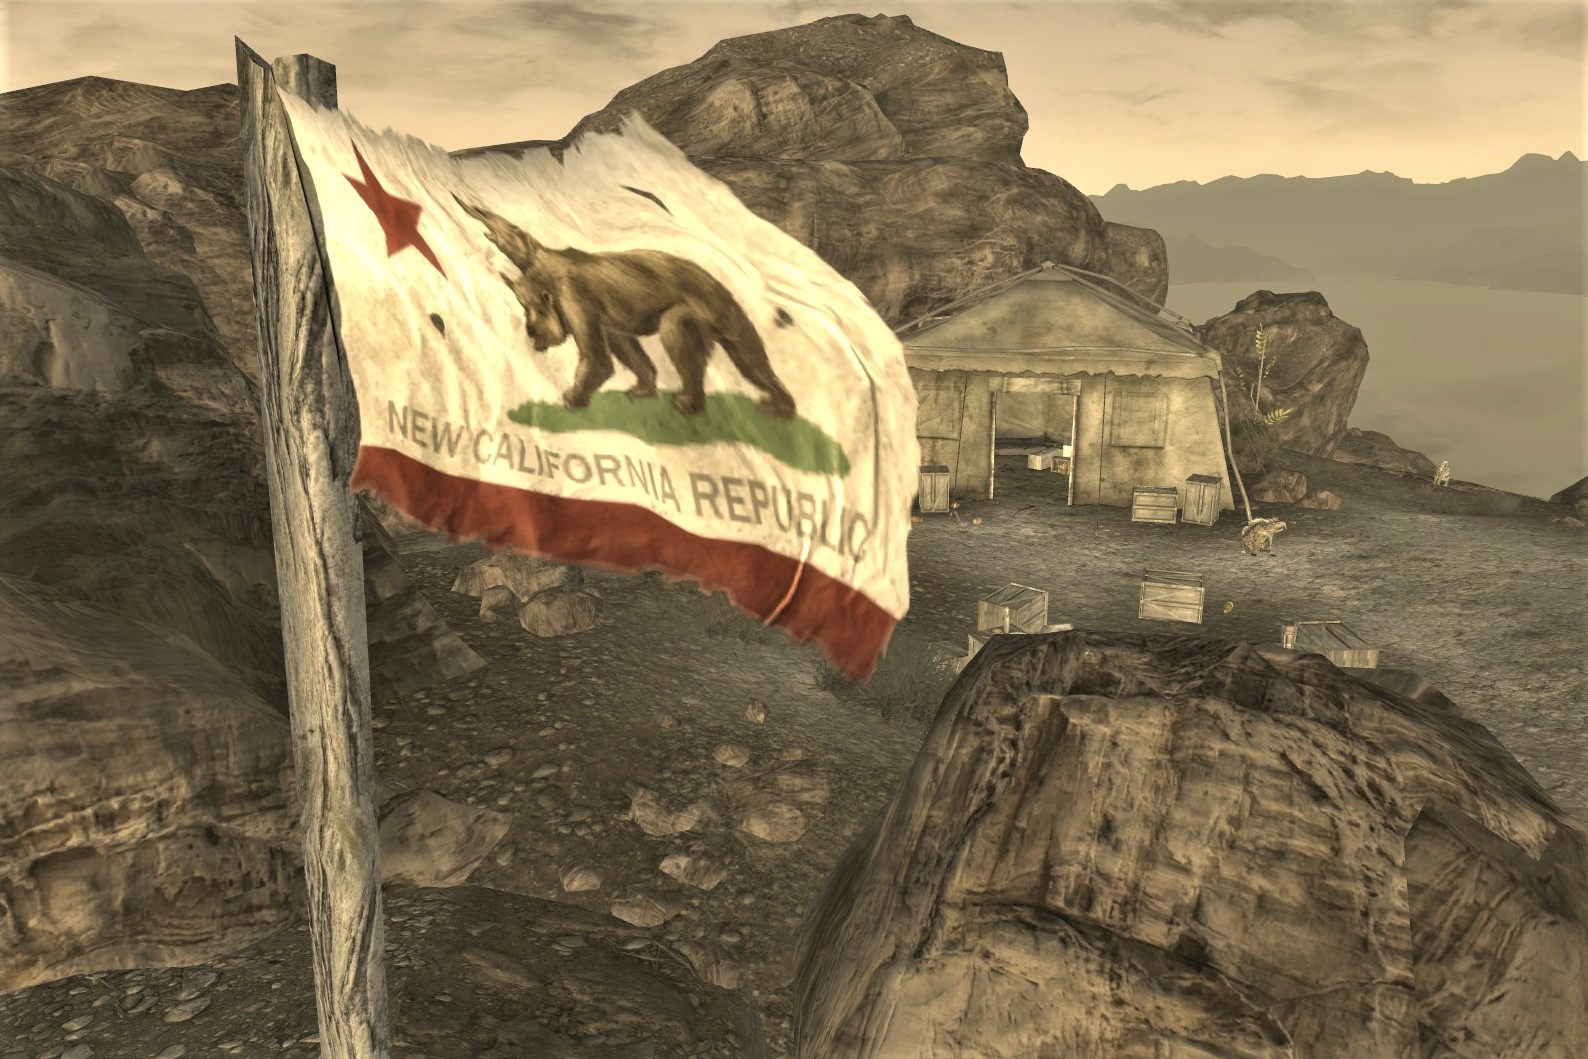 fallout new vegas ncr questions